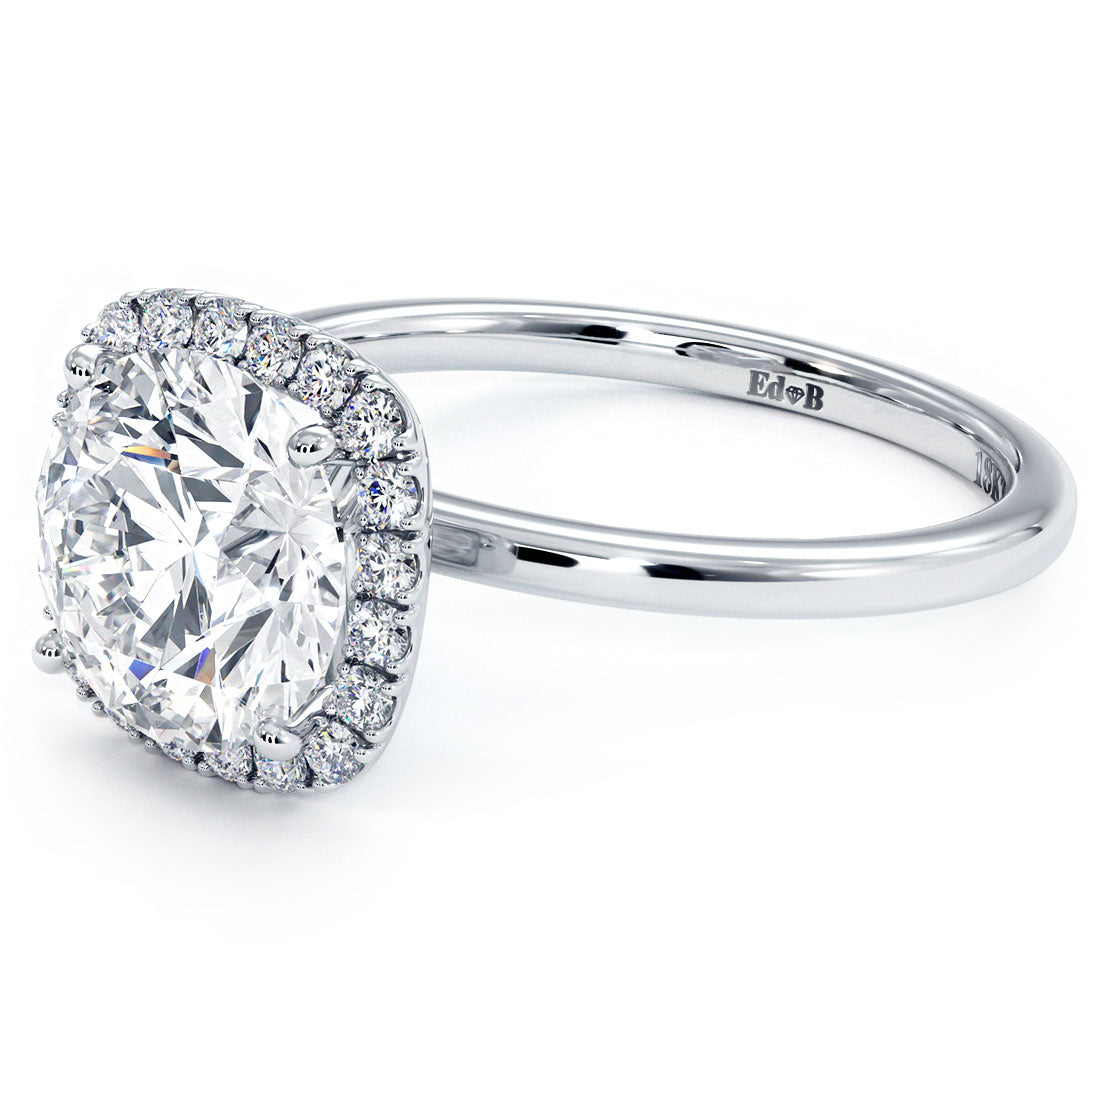 Cushion Halo With Round Center Petite Micropavé Diamond Engagement Ring Setting